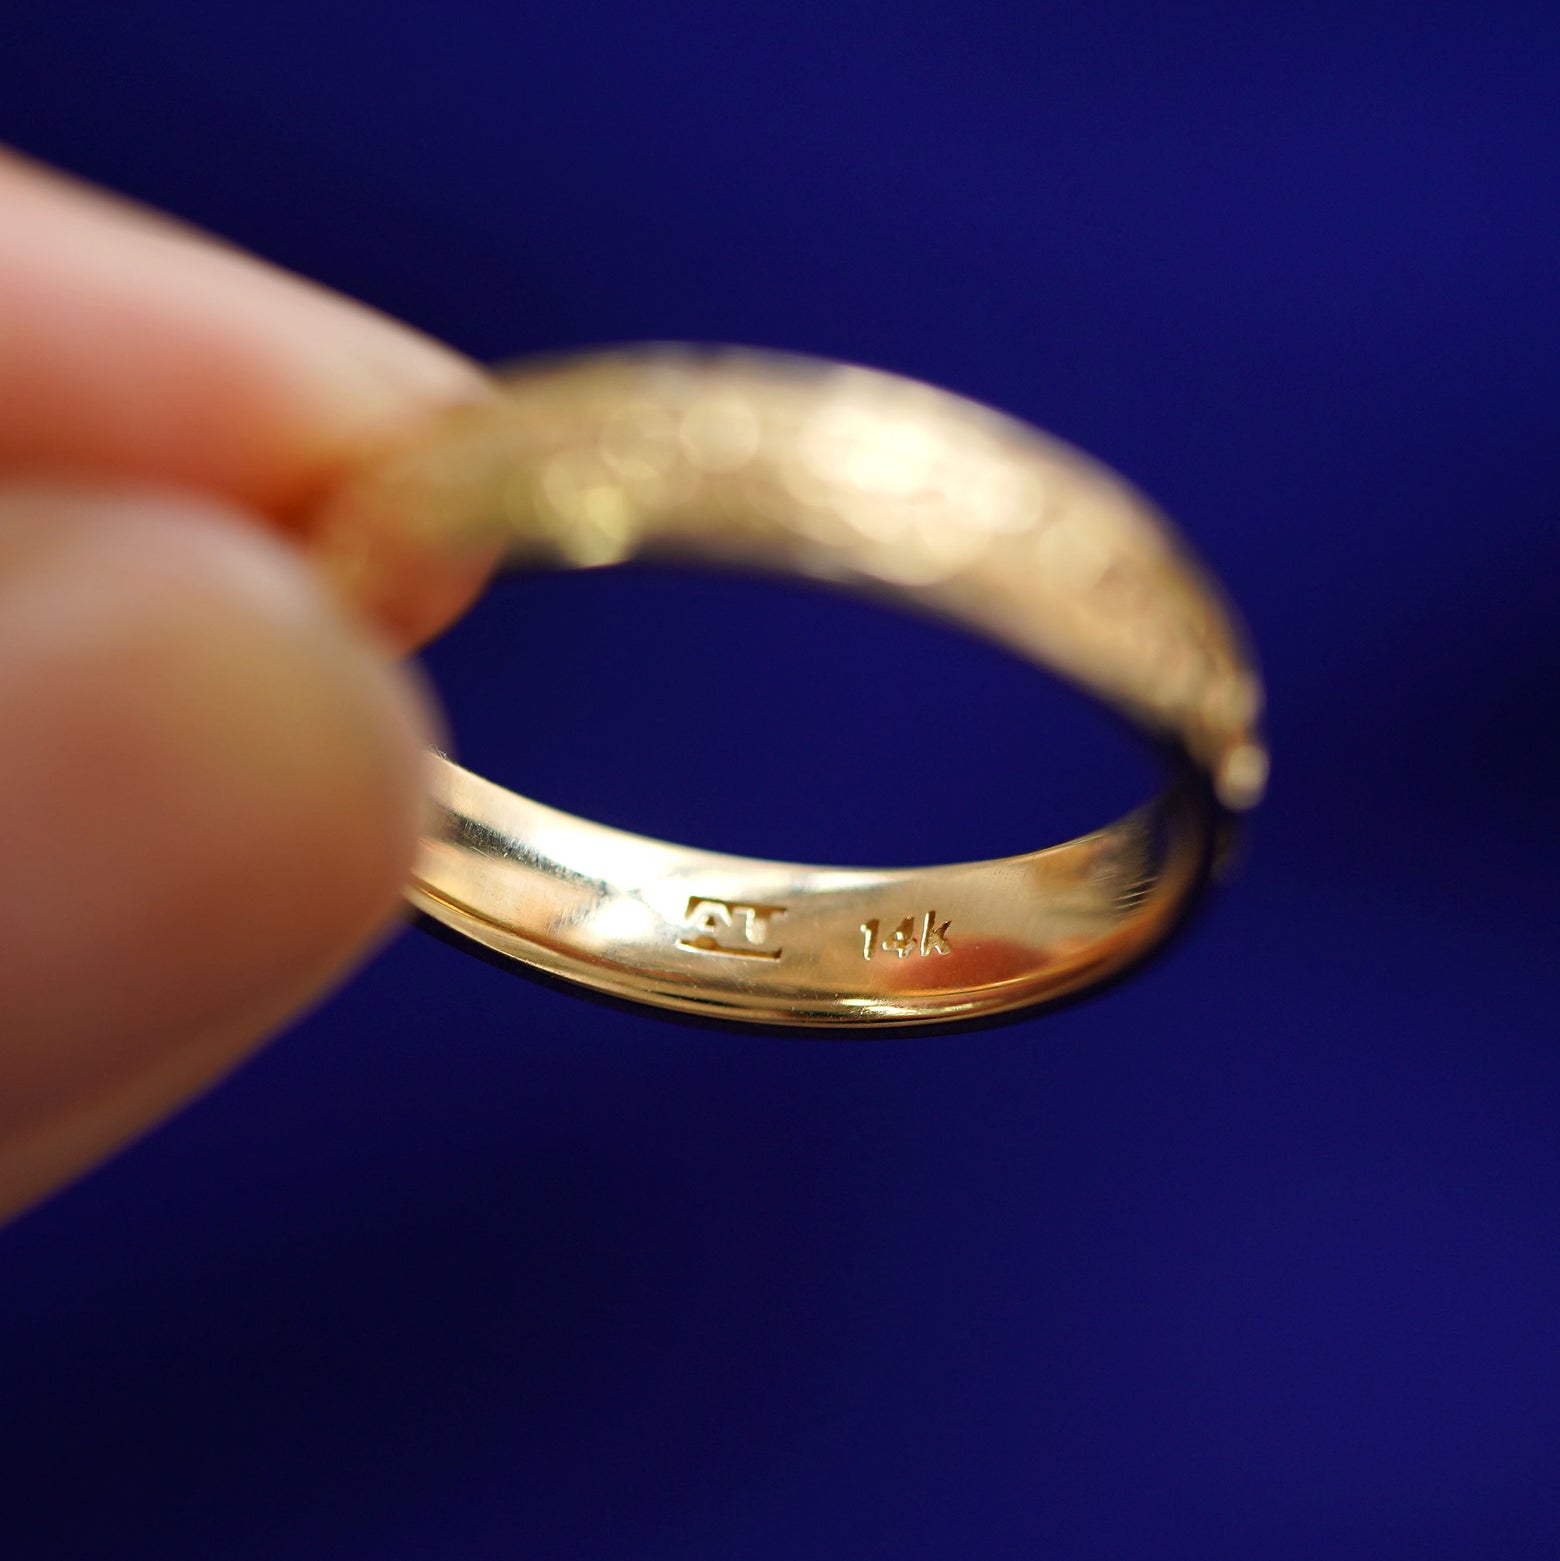 A model holding a 14k gold Filigree Band facing down between their fingertips to show the inside of the band